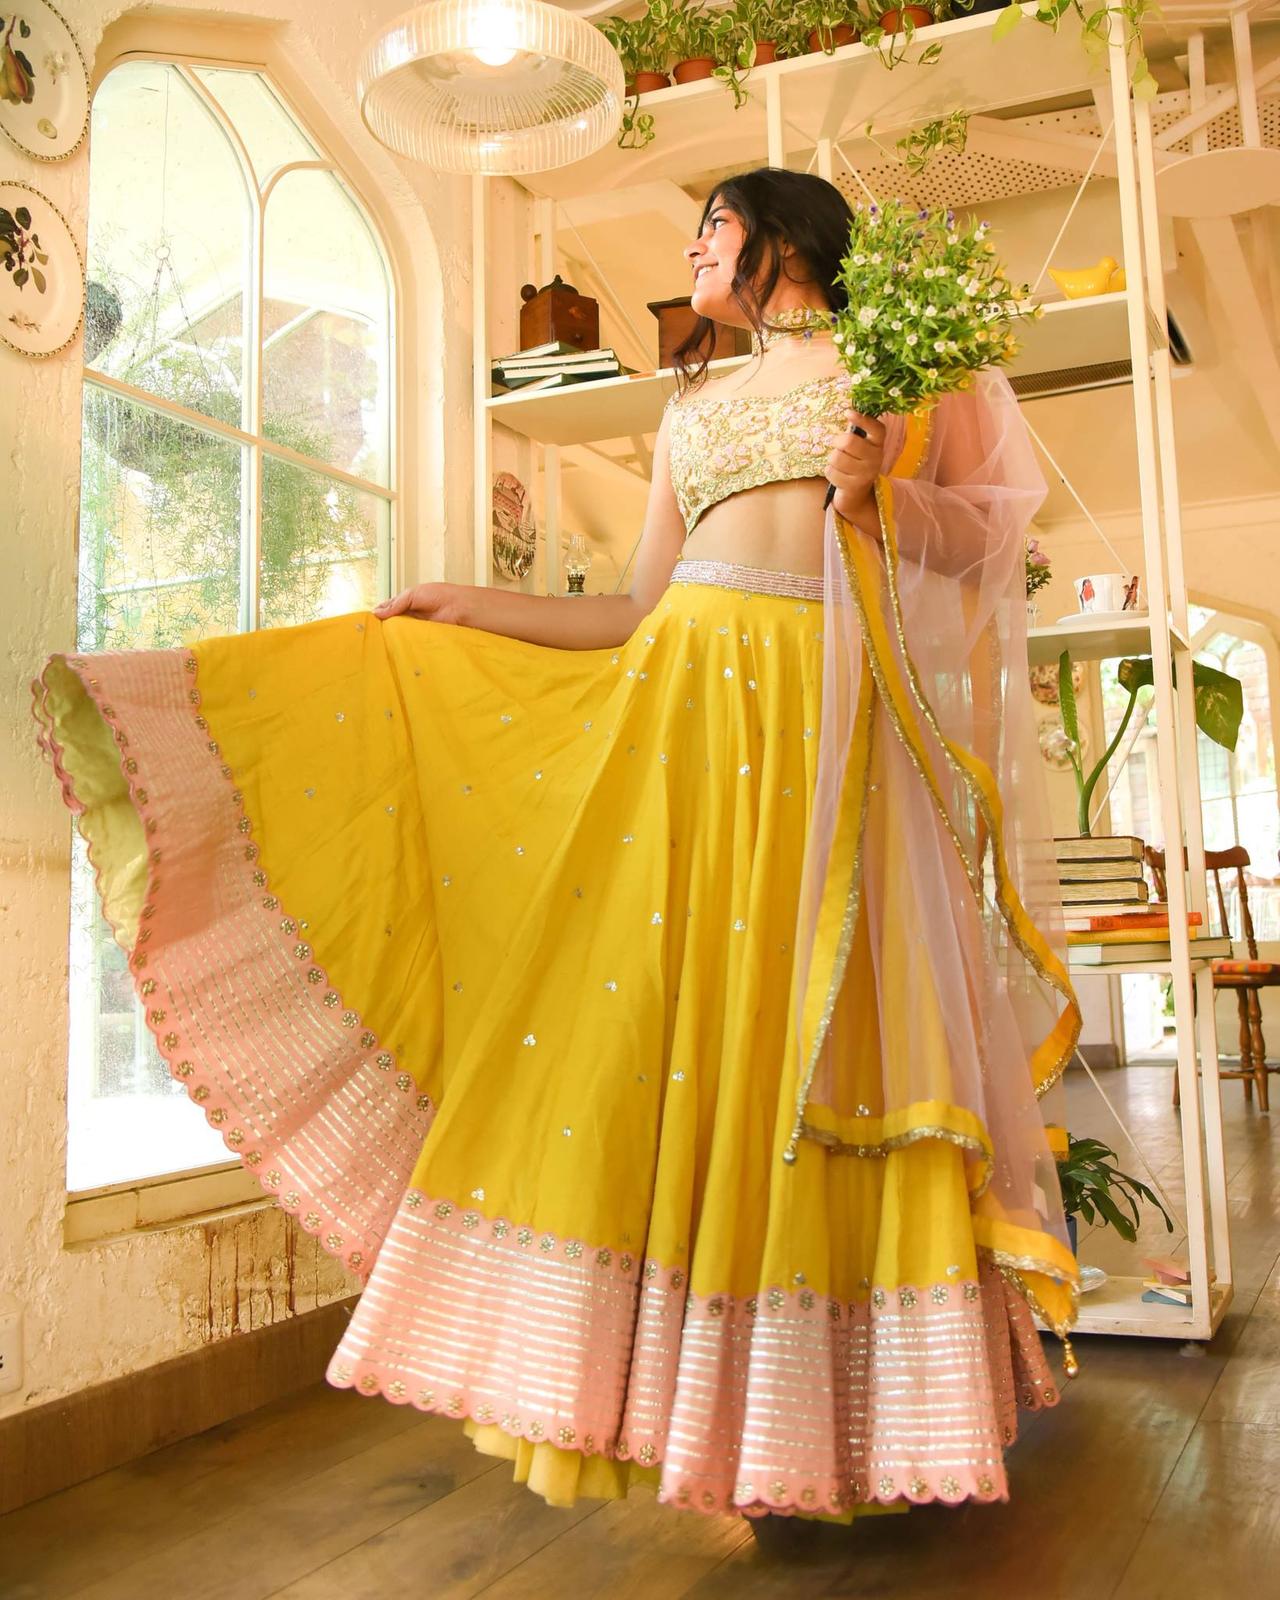 Wedding Dresses And Gowns On Rent in Mumbai, Mumbai Wedding Dresses And  Gowns On Rent | Weddingplz